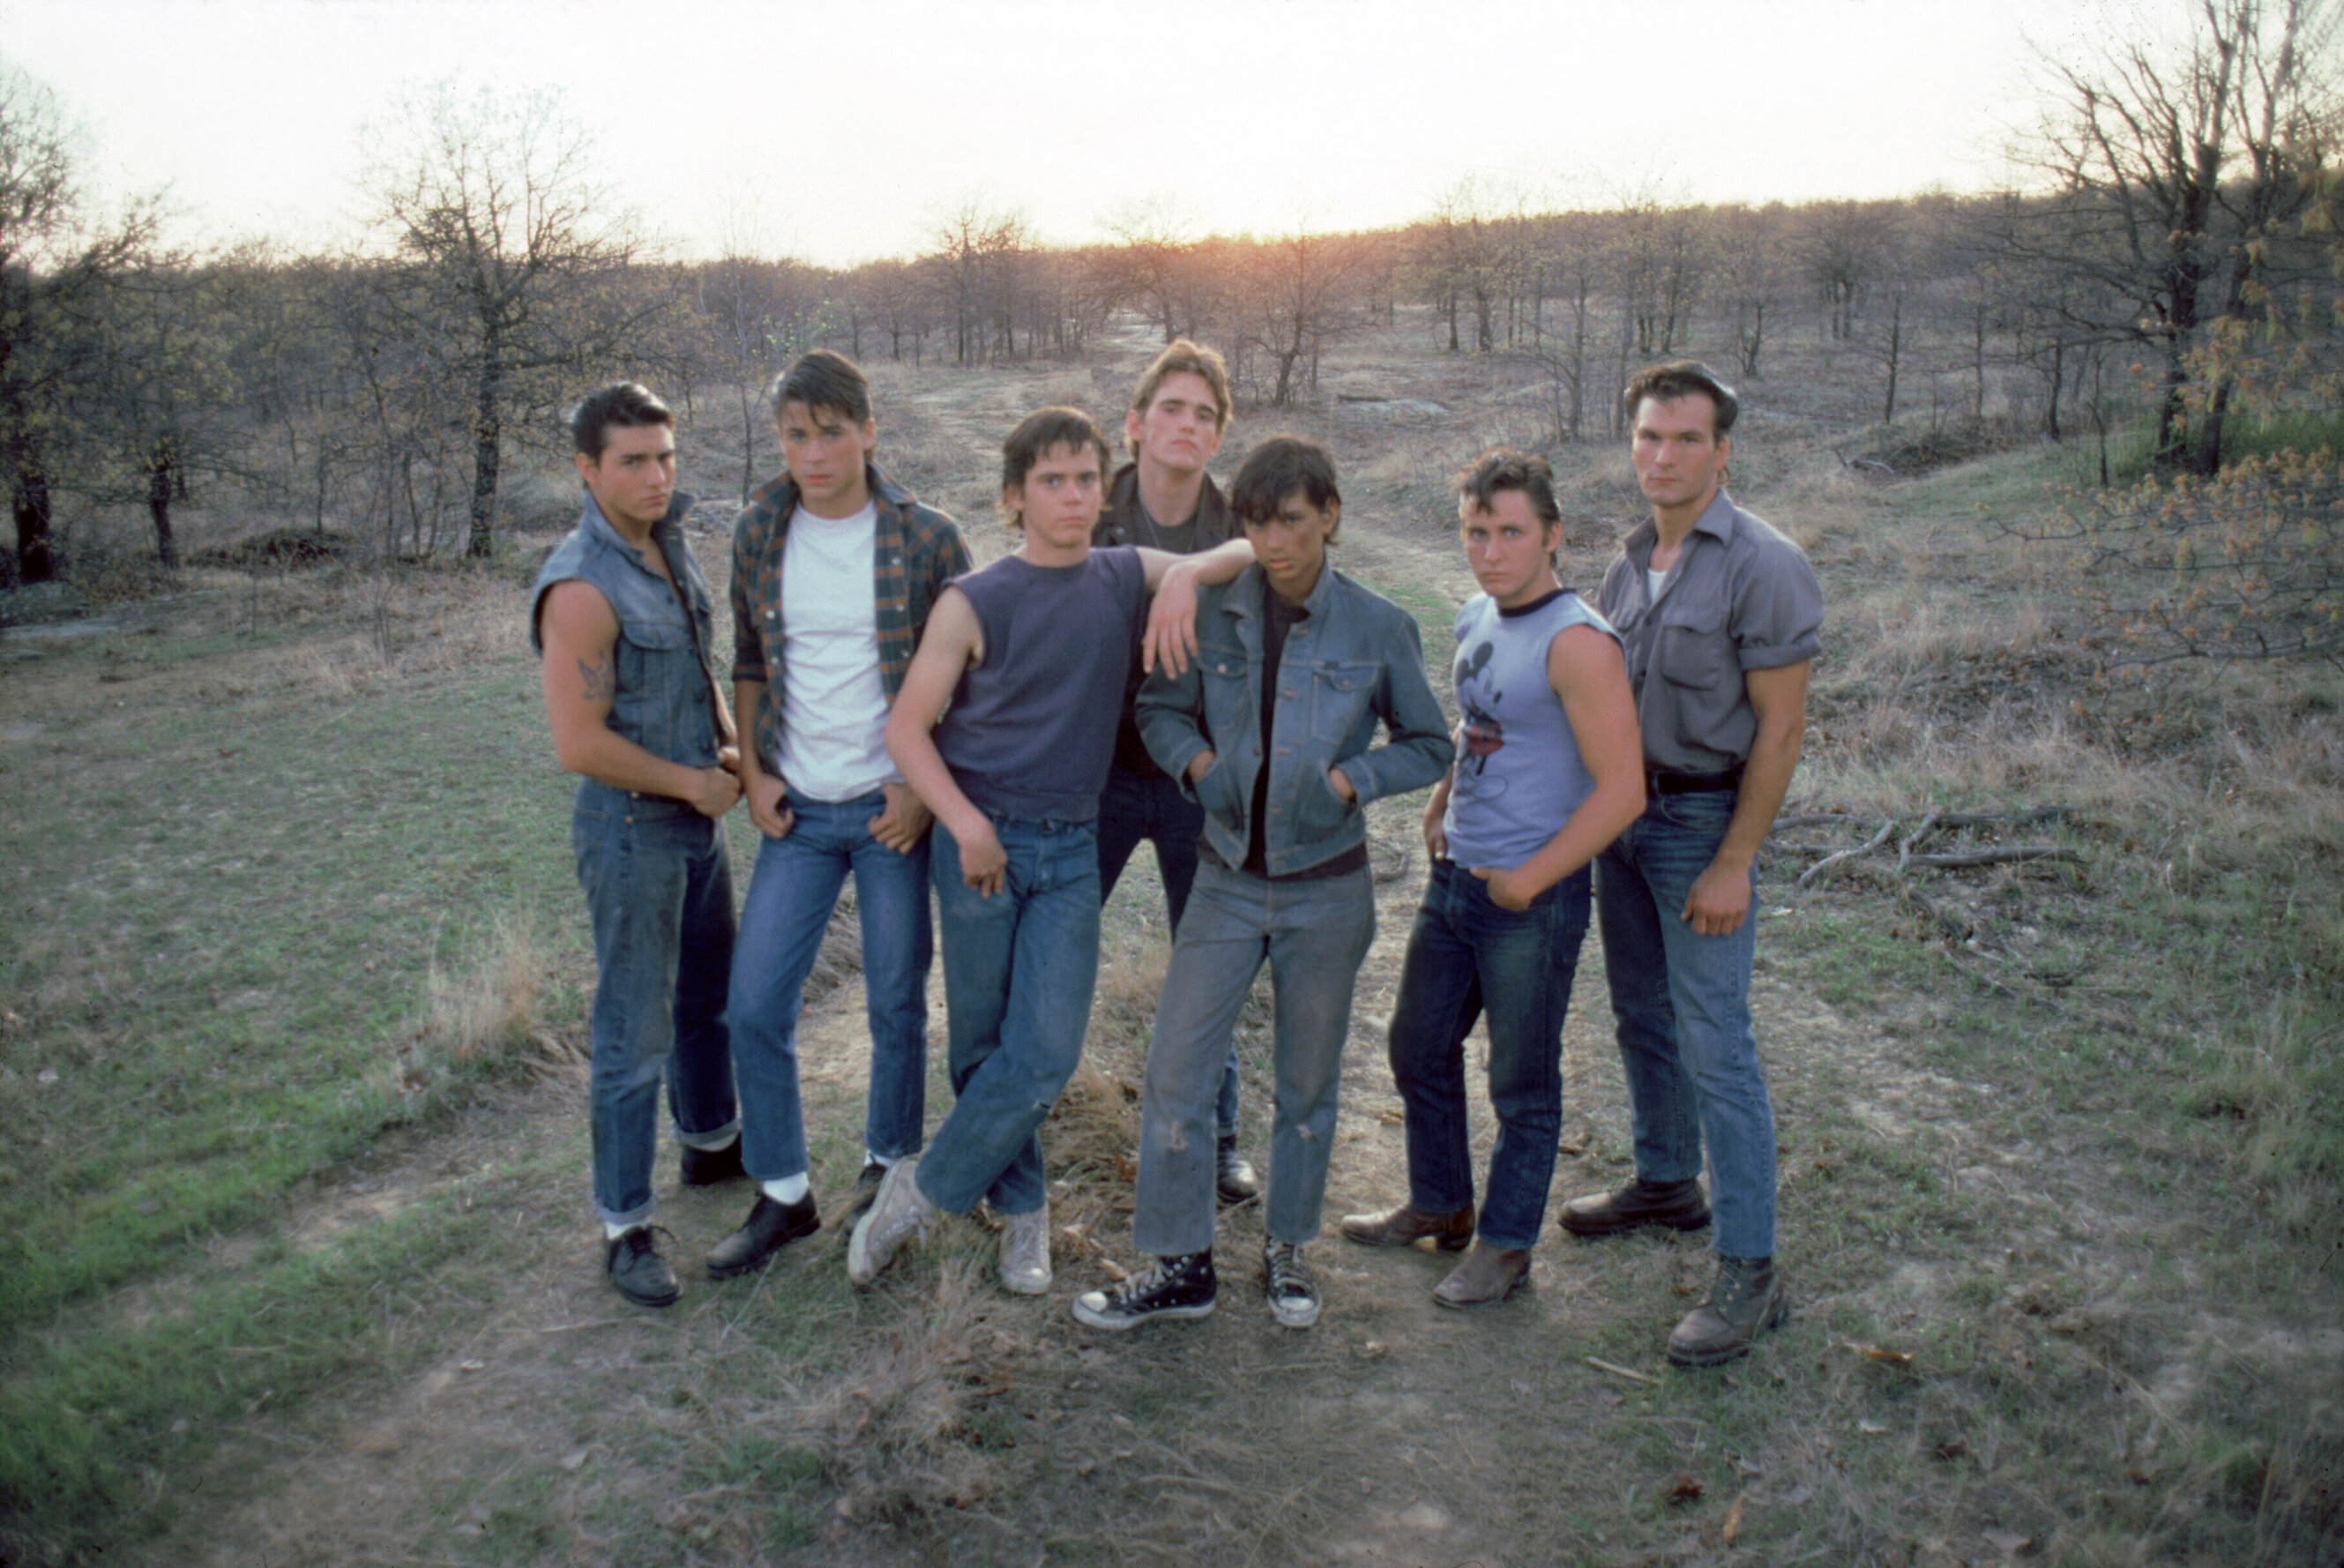 On the set of 'The Outsiders'